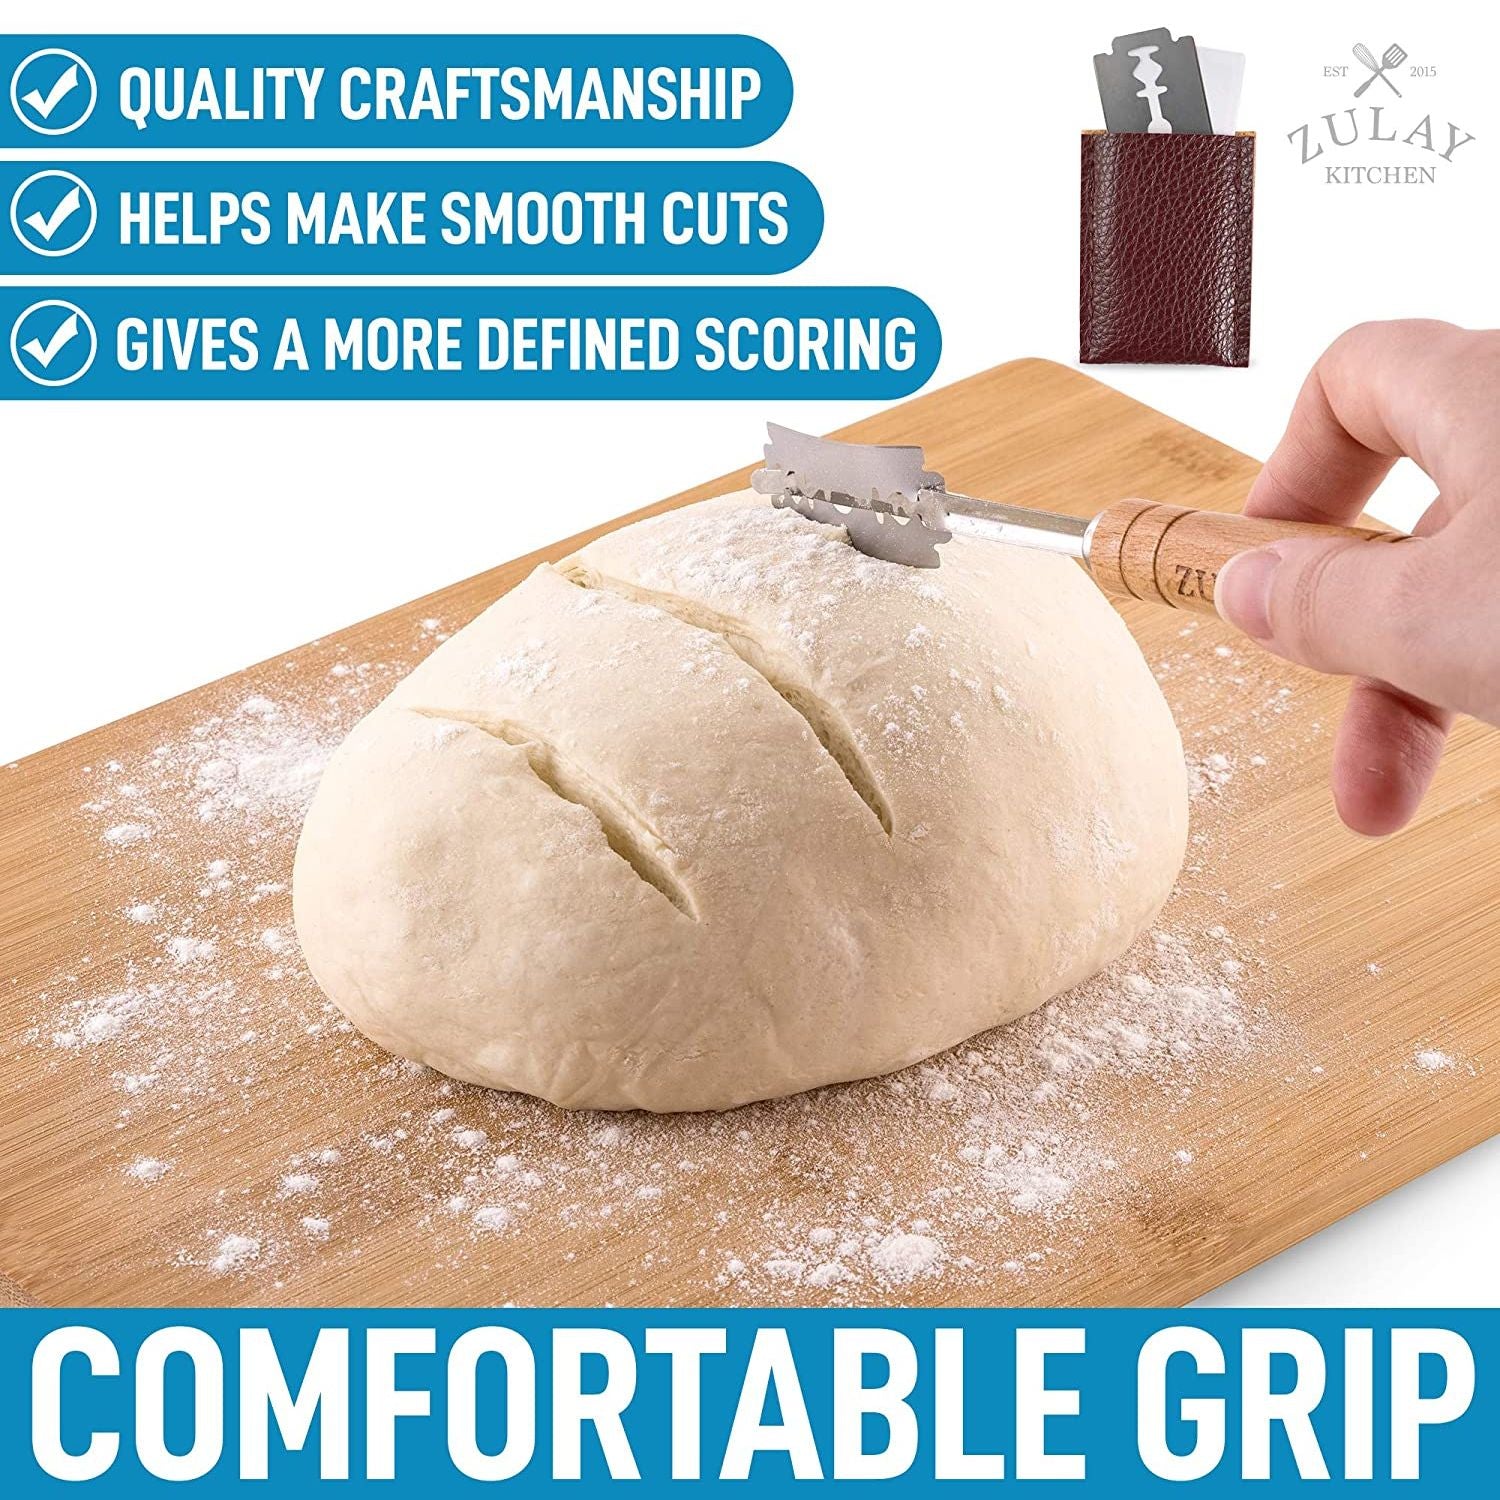 Bread Lame Cutter & Protective Cover